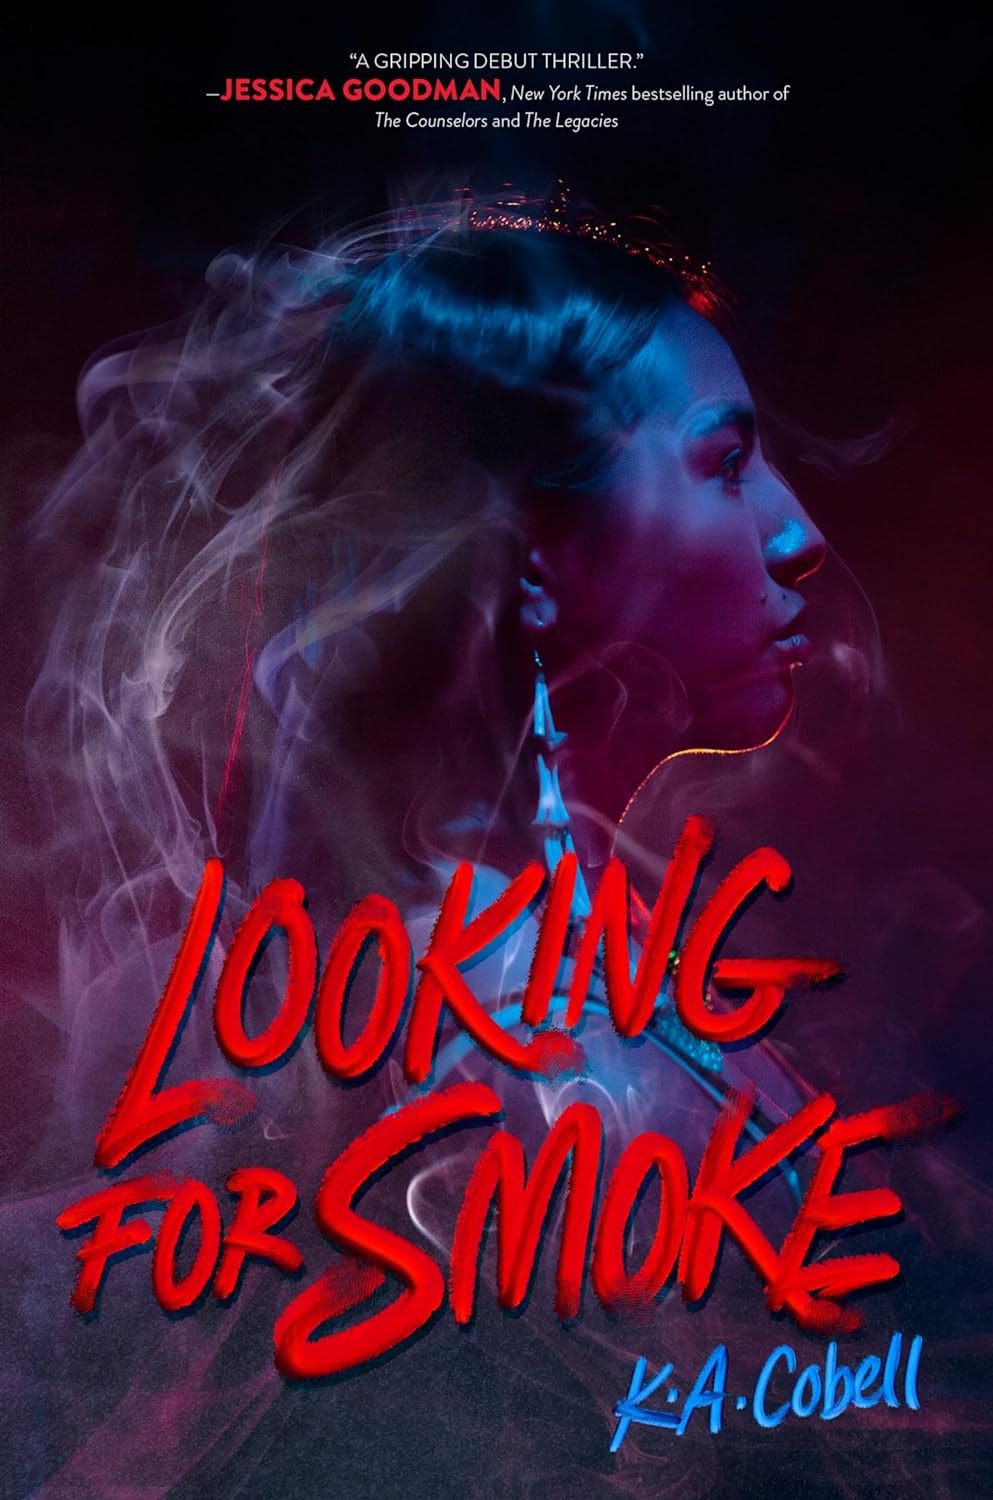 “Looking for Smoke” by K.A. Cobell.